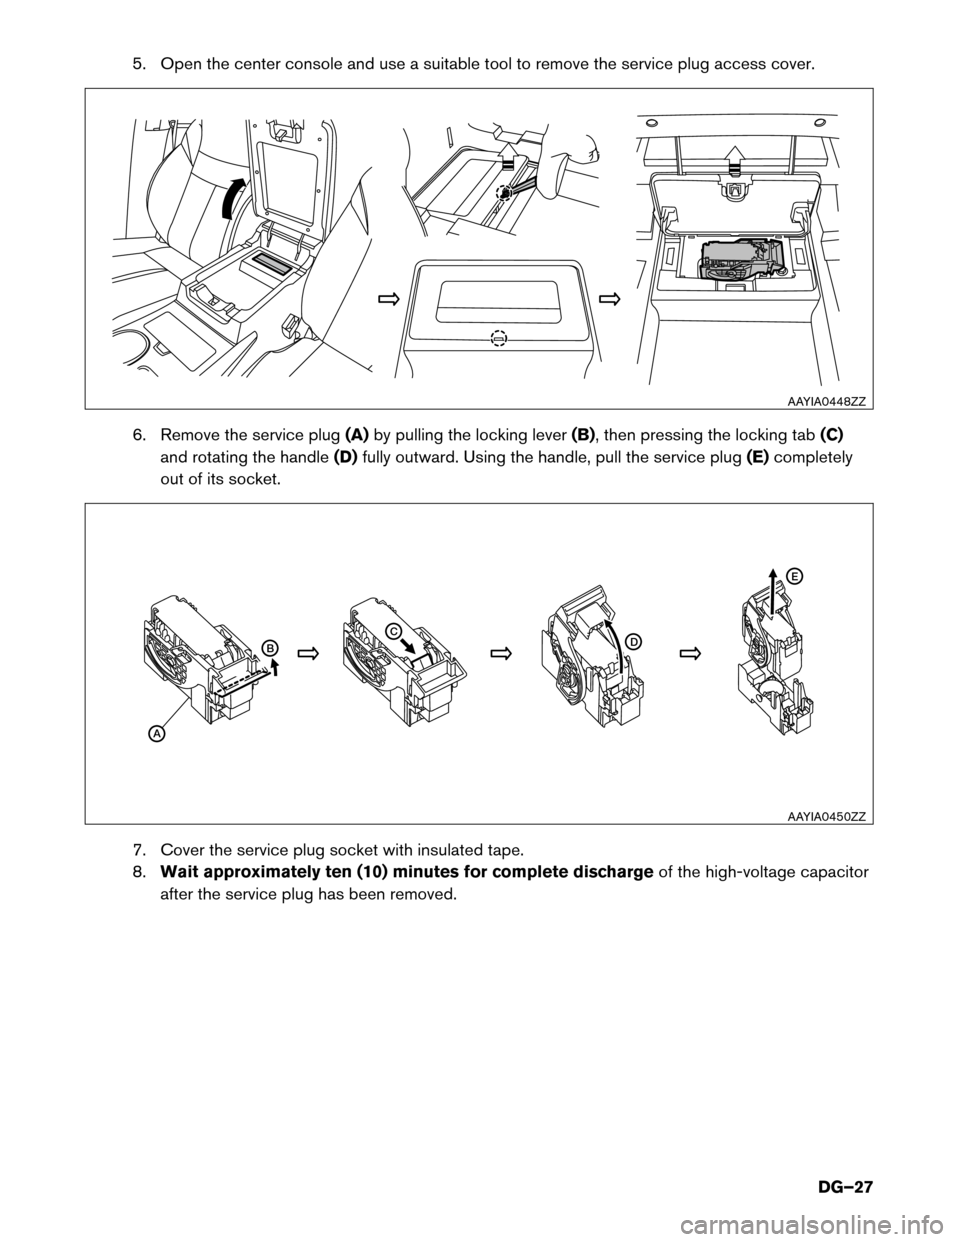 NISSAN MURANO HYBRID 2016 3.G Dismantling Guide 5. Open the center console and use a suitable tool to remove the service plug access cover.
6.
Remove the service plug (A)by pulling the locking lever (B), then pressing the locking tab (C)
and rotati